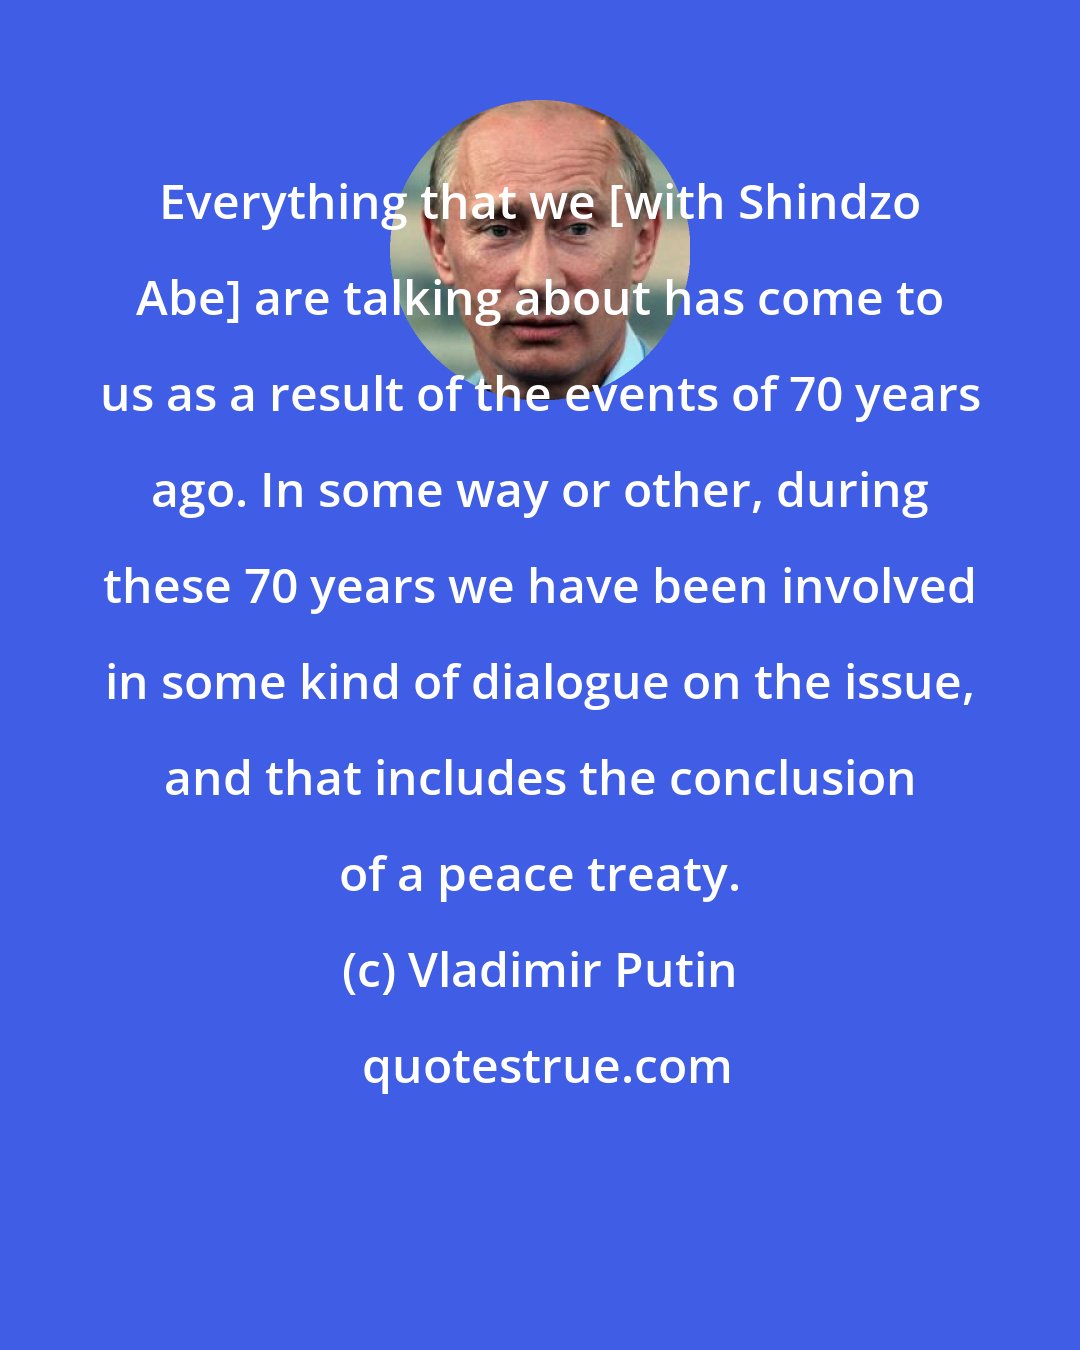 Vladimir Putin: Everything that we [with Shindzo Abe] are talking about has come to us as a result of the events of 70 years ago. In some way or other, during these 70 years we have been involved in some kind of dialogue on the issue, and that includes the conclusion of a peace treaty.